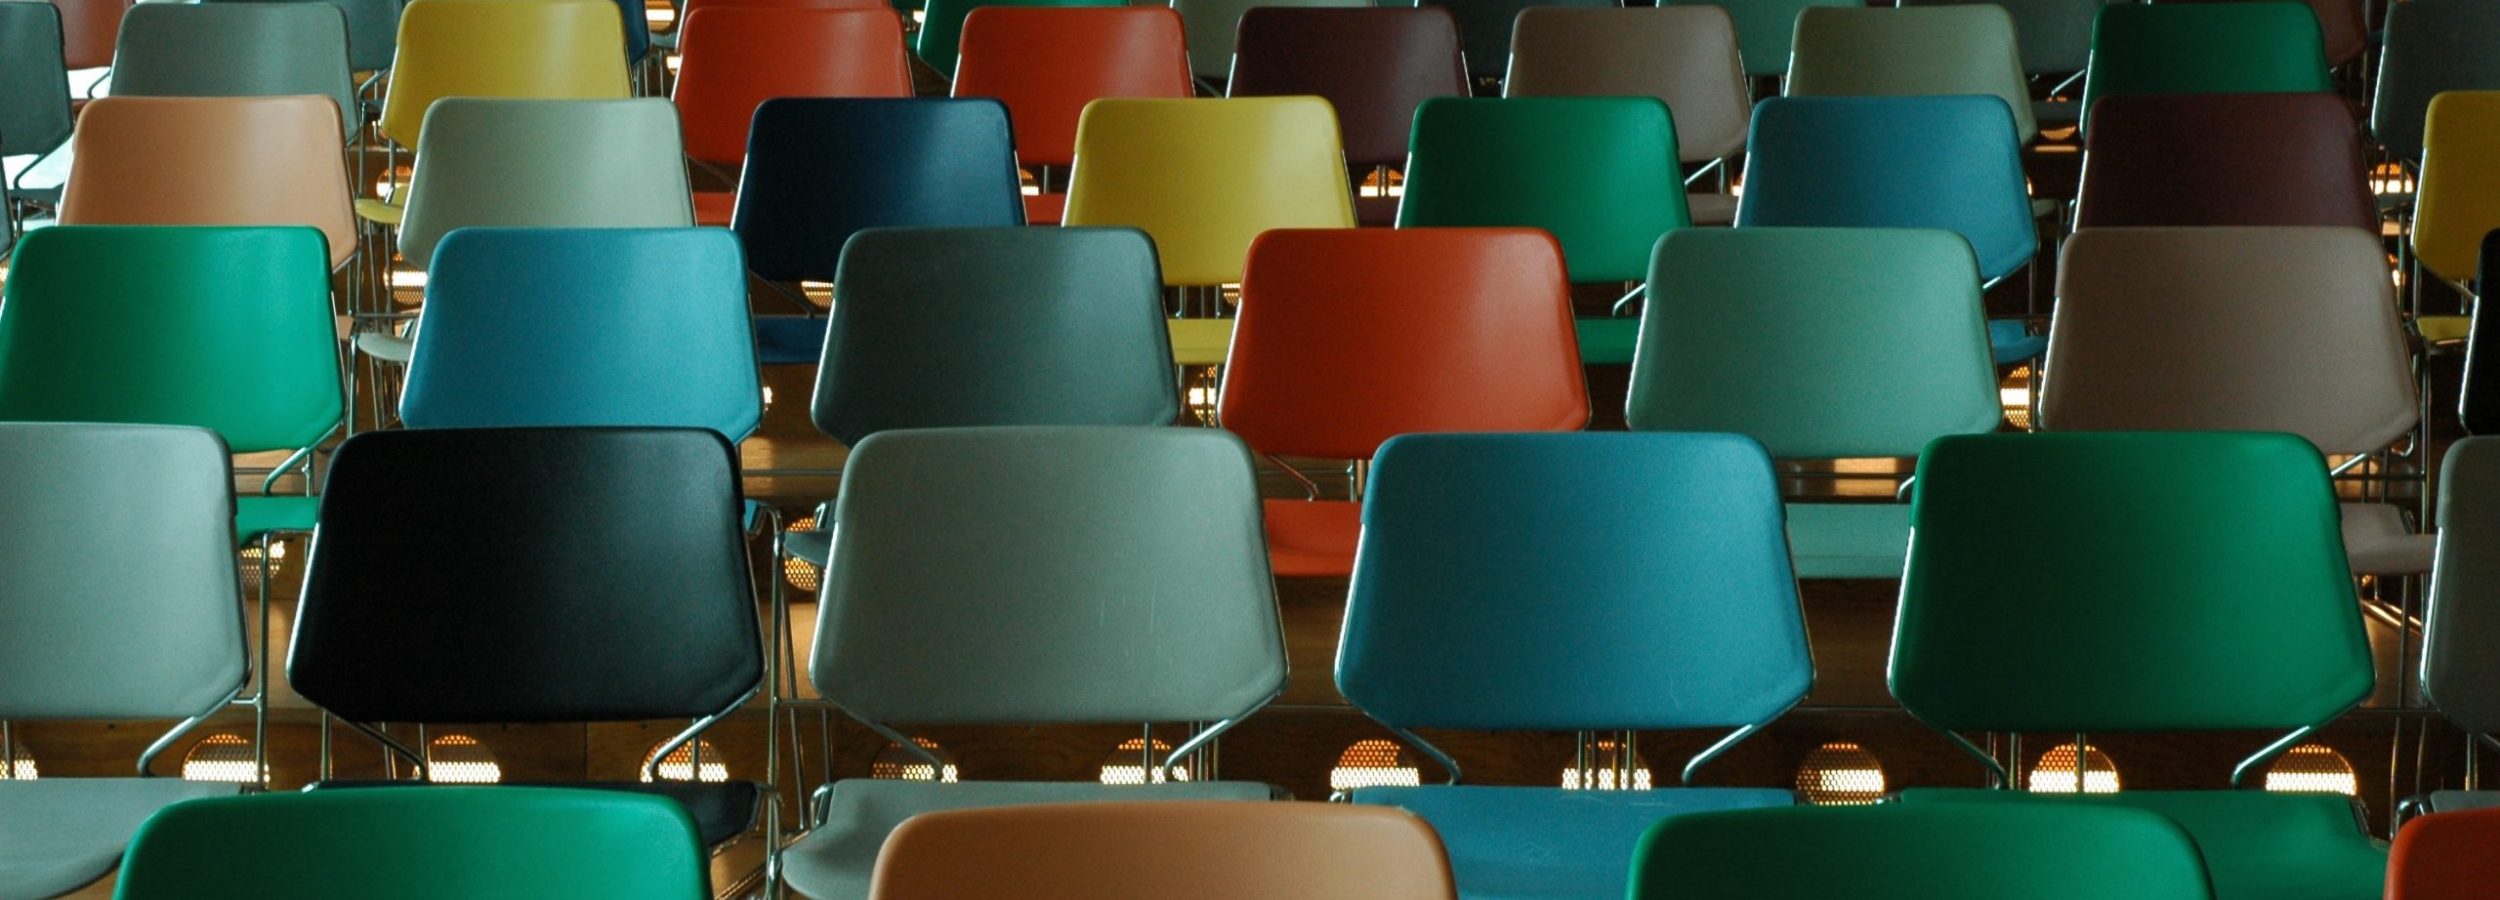 A room full of multi-colored chairs arranged theater-style.